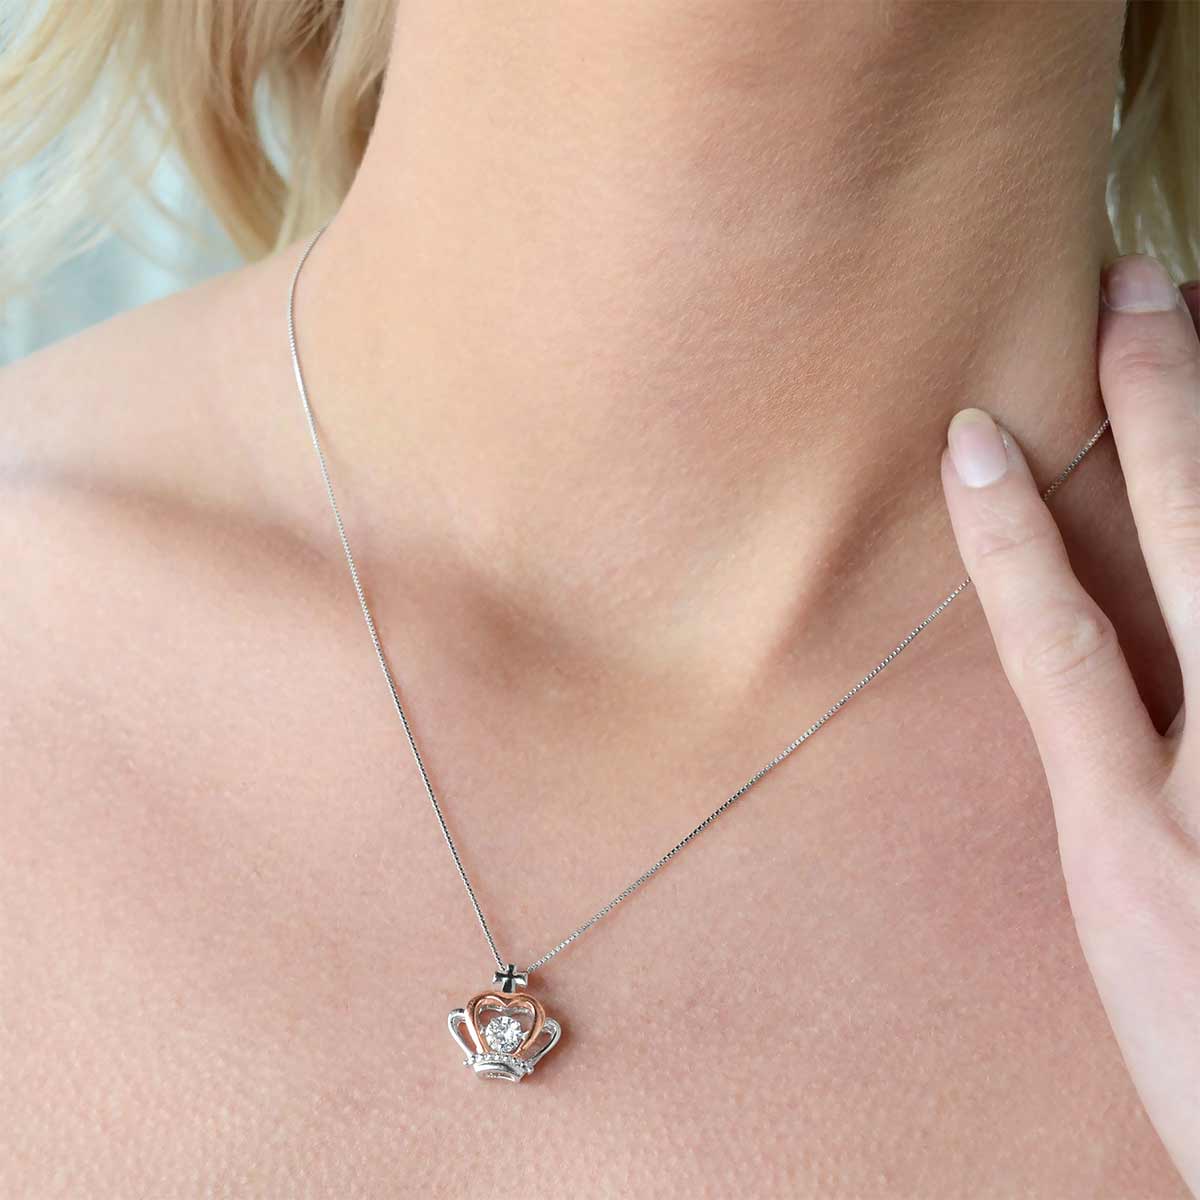 To My Badass Mom - Luxe Crown Necklace Set With Gift Wrap